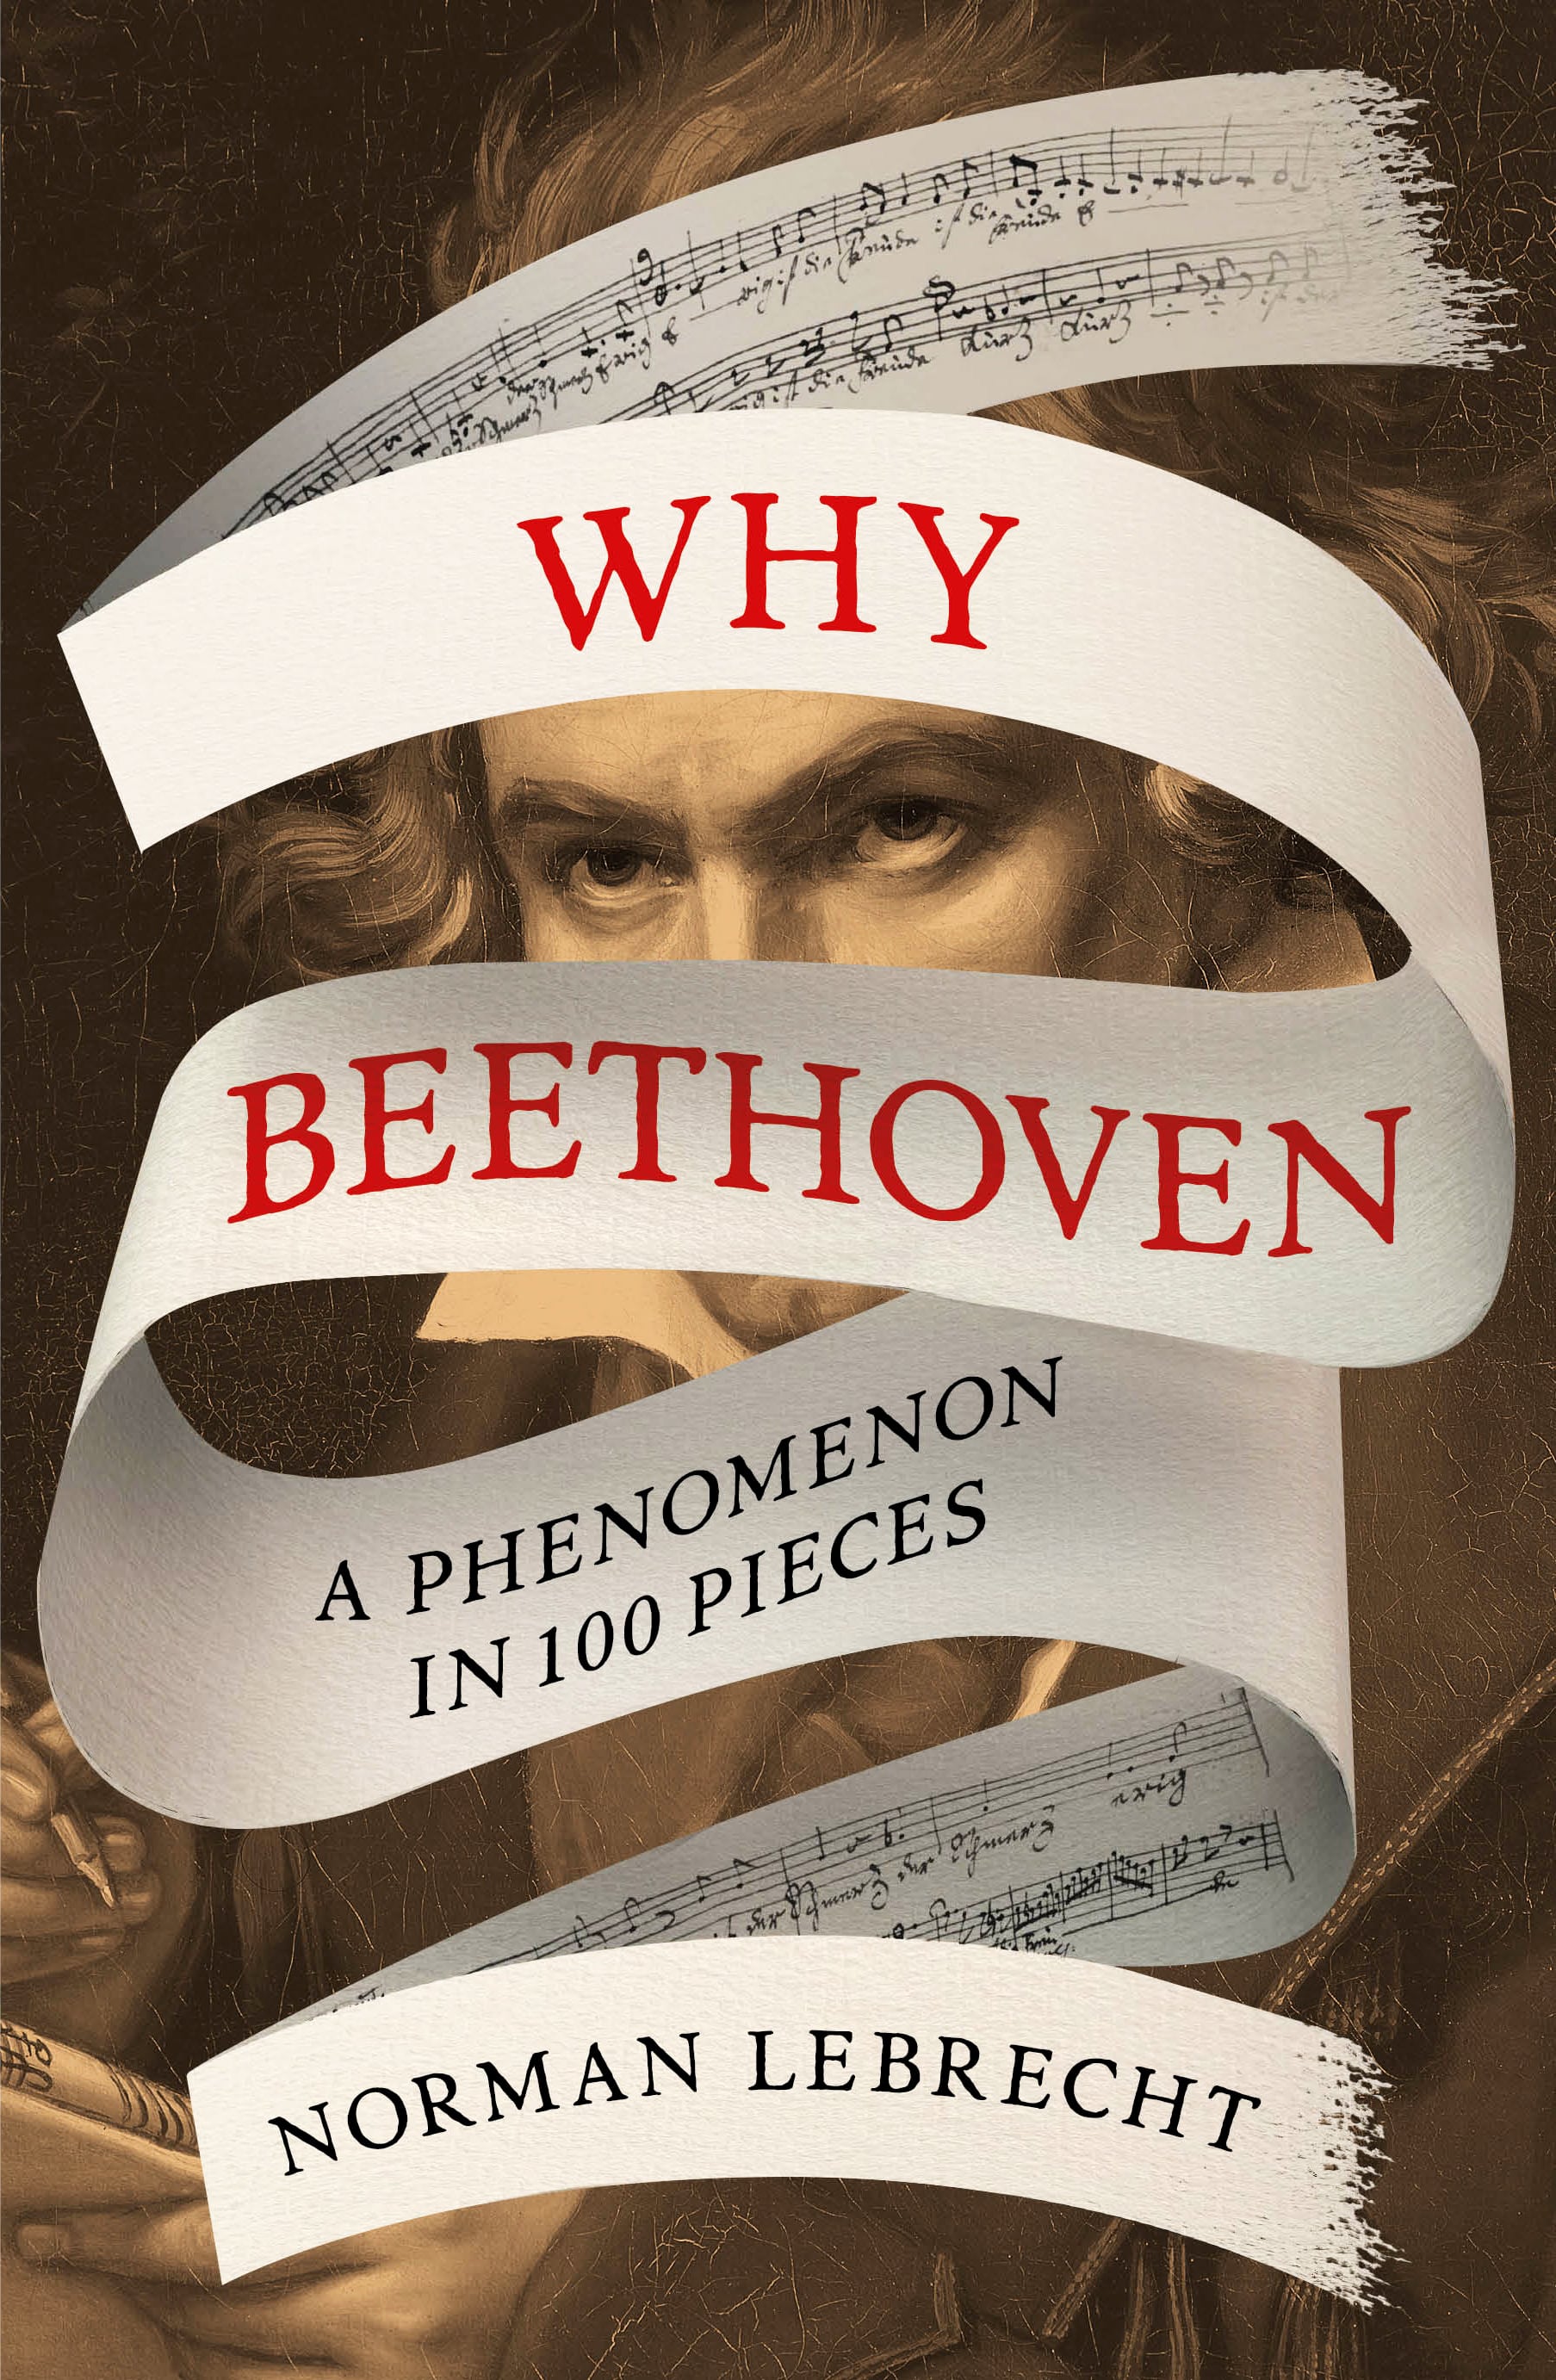 Beethoven’s most performed work is revealed